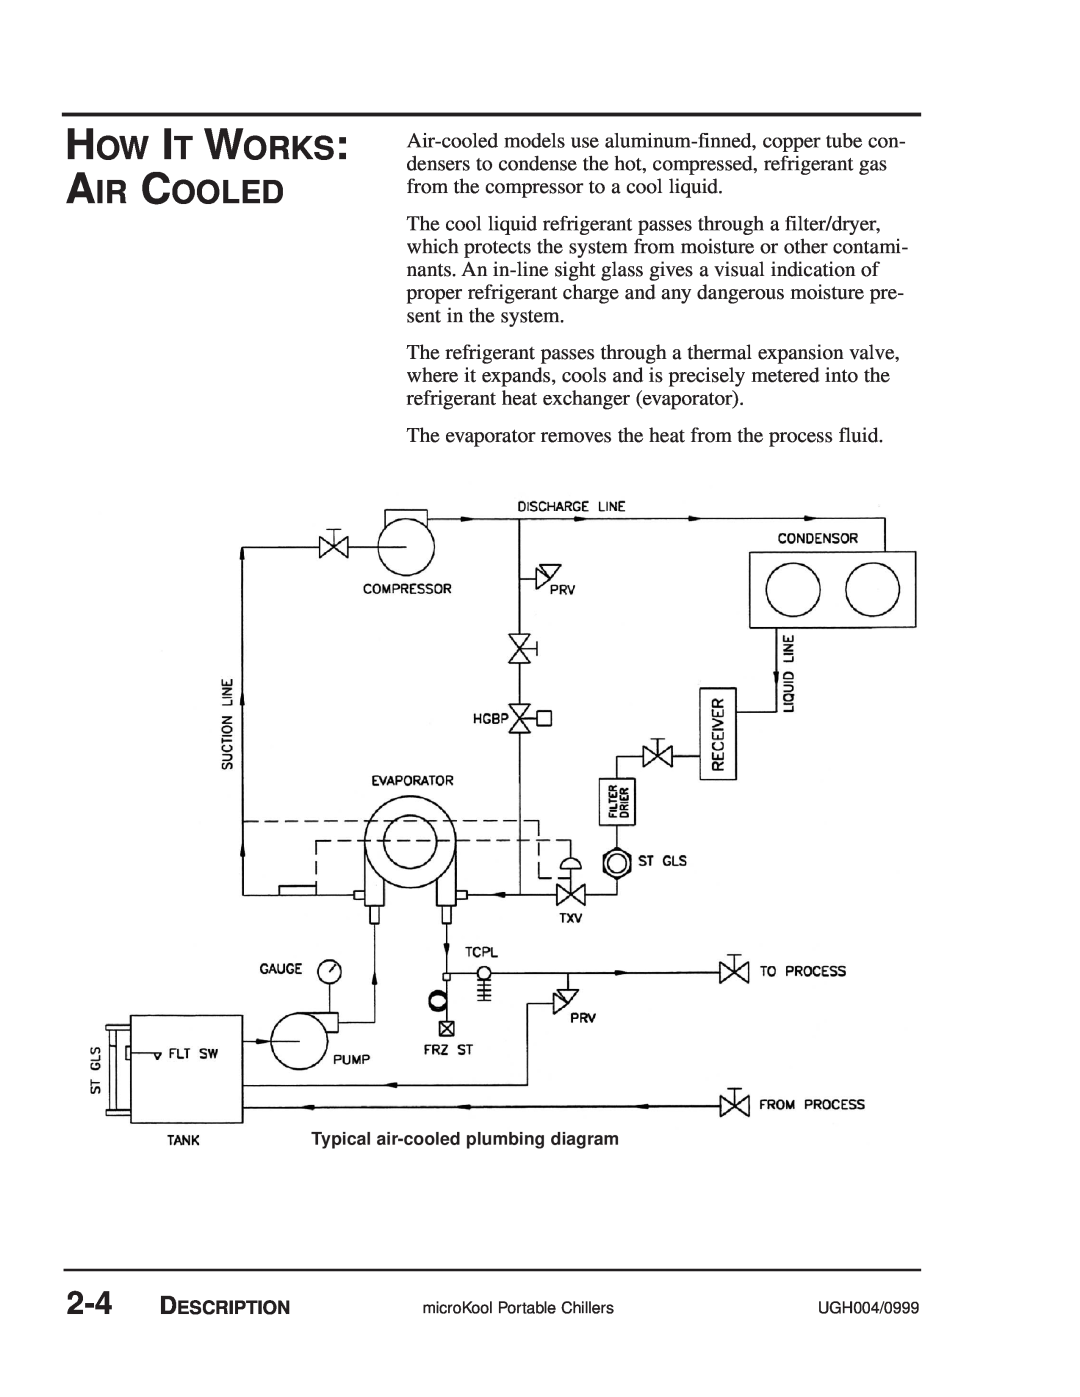 Conair MPA, MPW manual How It Works Air Cooled, Typical air-cooled plumbing diagram 